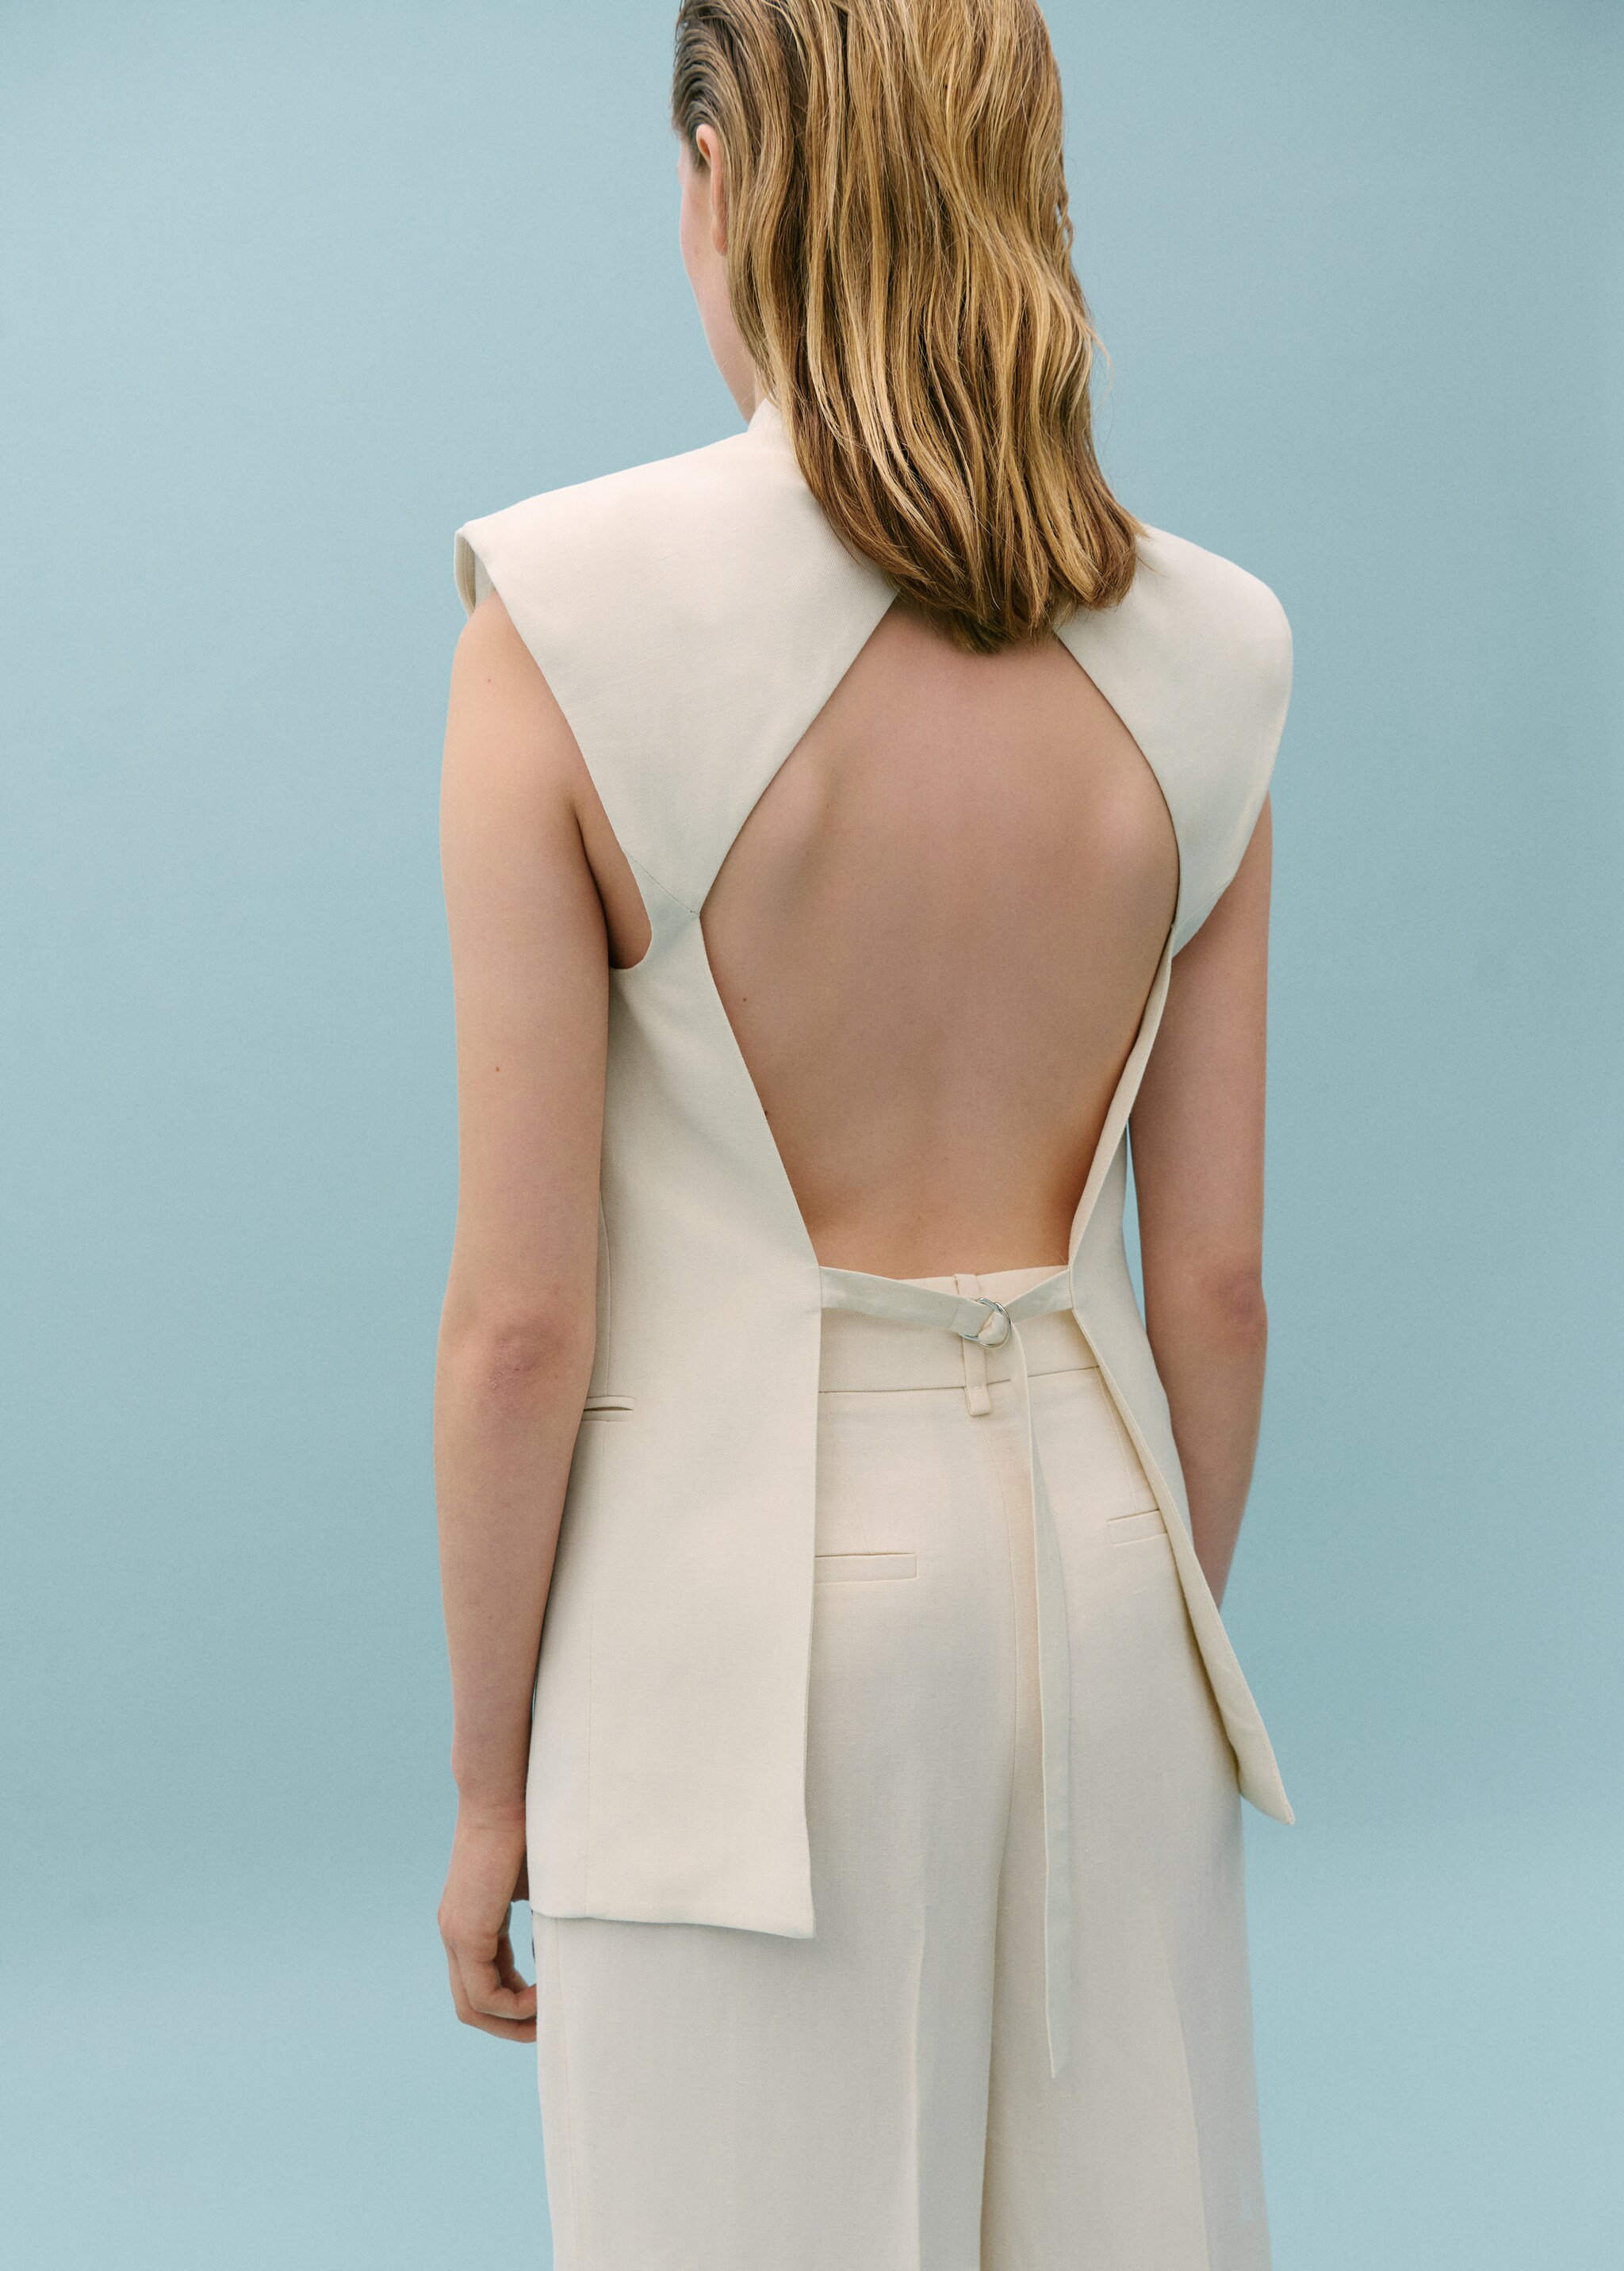 Suit waistcoat with open back - Reverse of the article